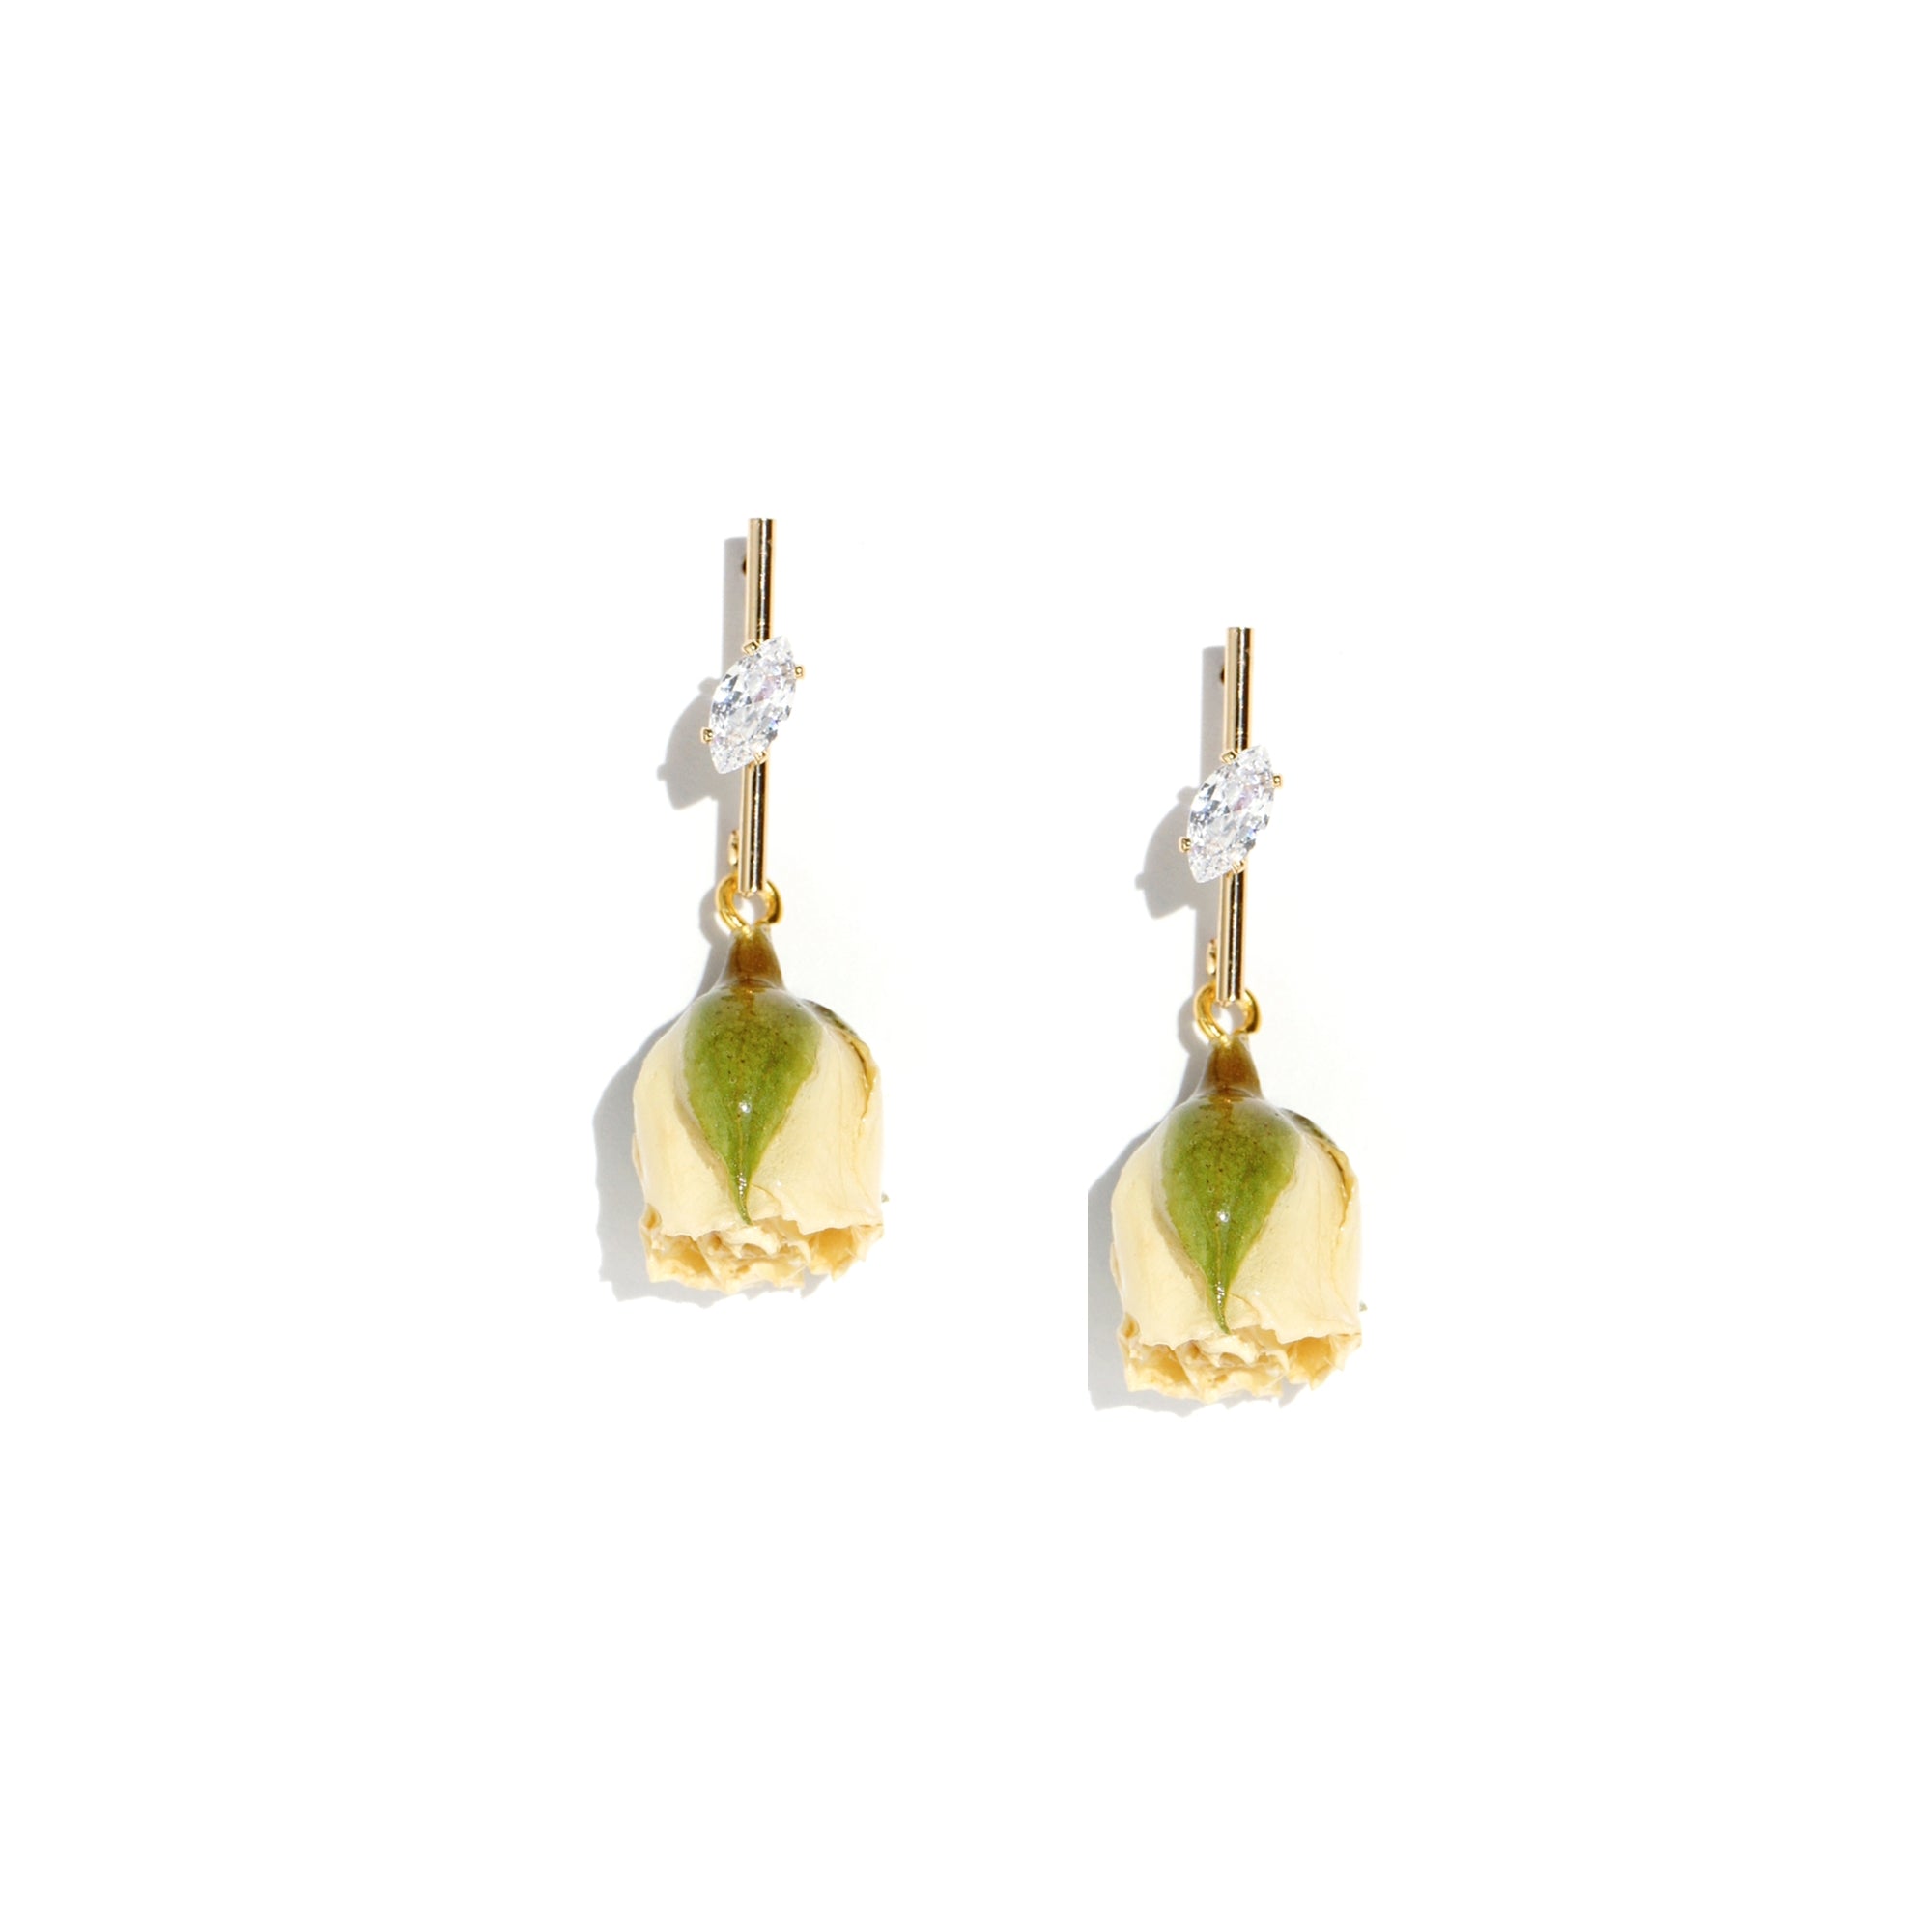 *REAL FLOWER* Rosa Brillante Rosebud Drop Earrings with Golden Stem and Crystal